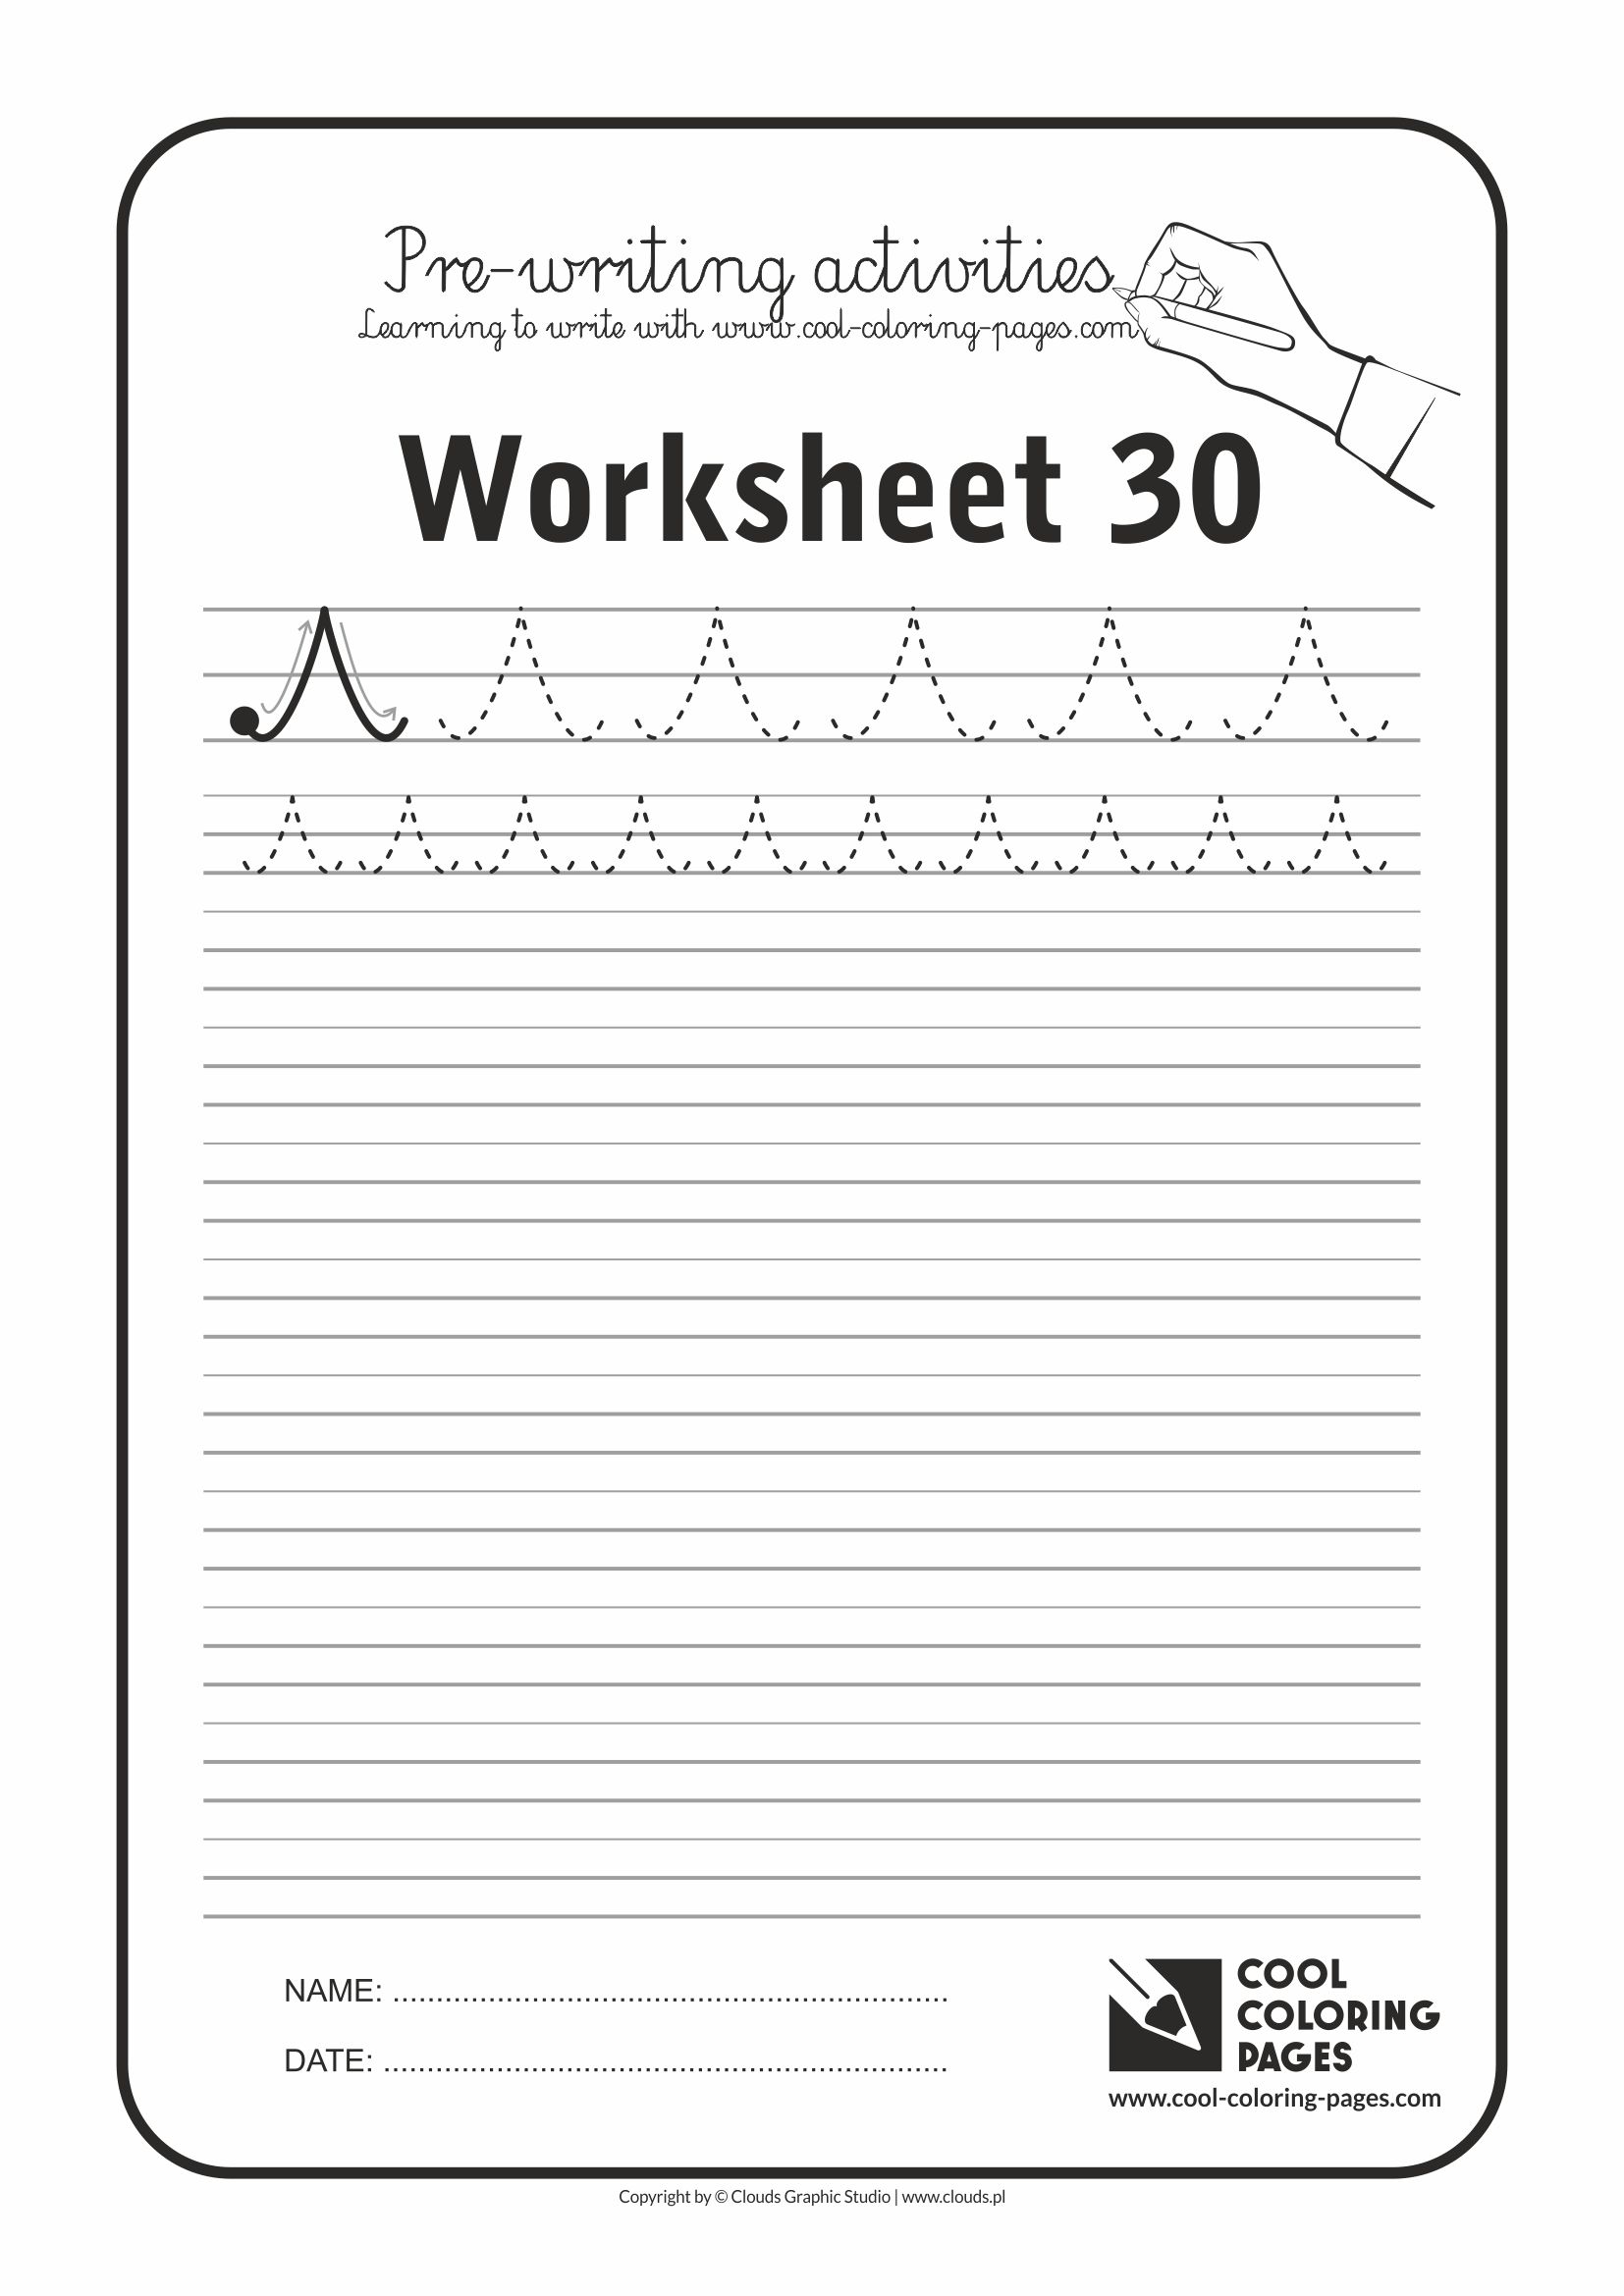 Cool Coloring Pages / Pre-writing activities / Worksheet no.30